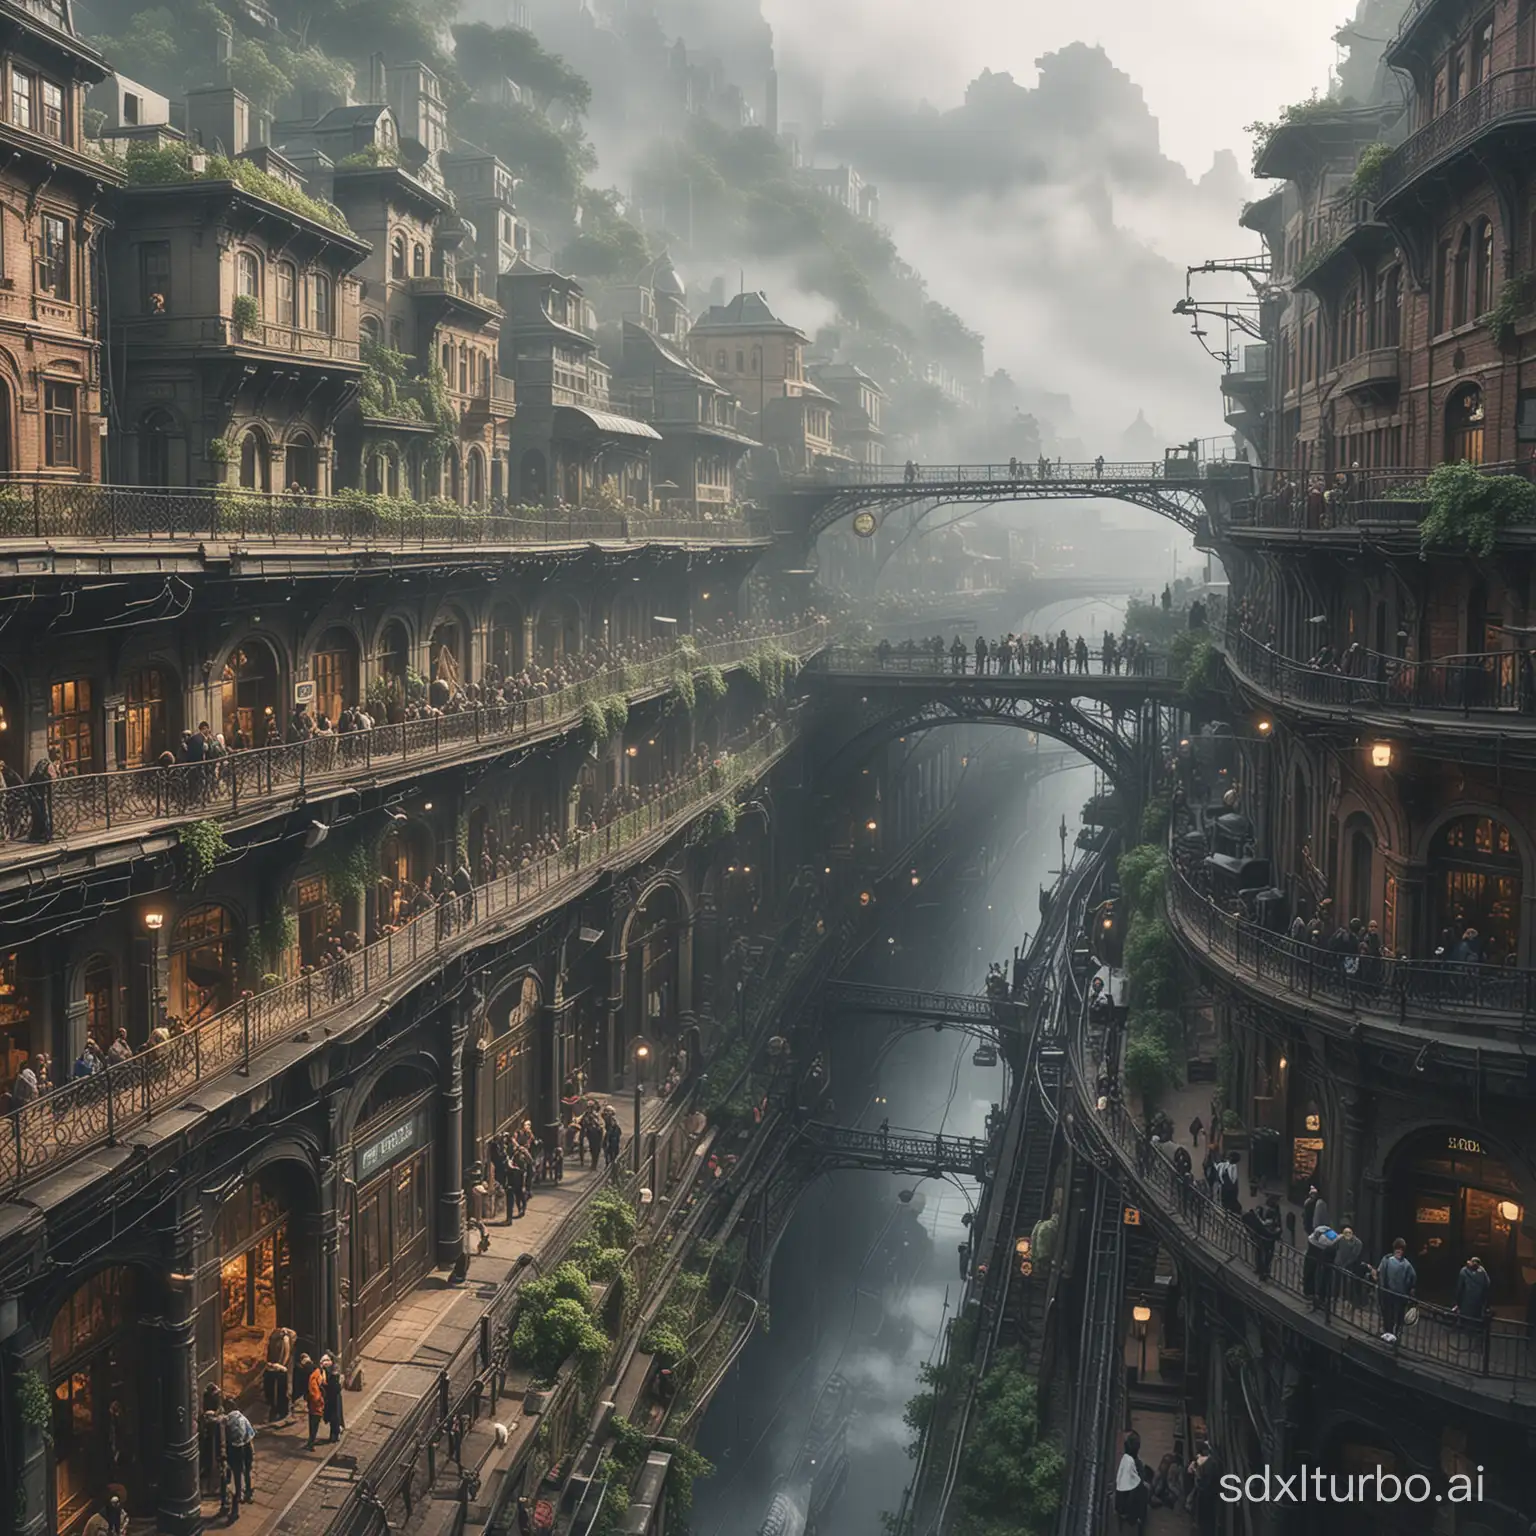 A prosperous city full of dense fog, cross-section, curvilinear building, the infinitely extending railway underground is exposed, shopping streets with people coming and going, detailed scenes, steampunk, organized, full of greenery, a building full of details The building is located at the end of the street